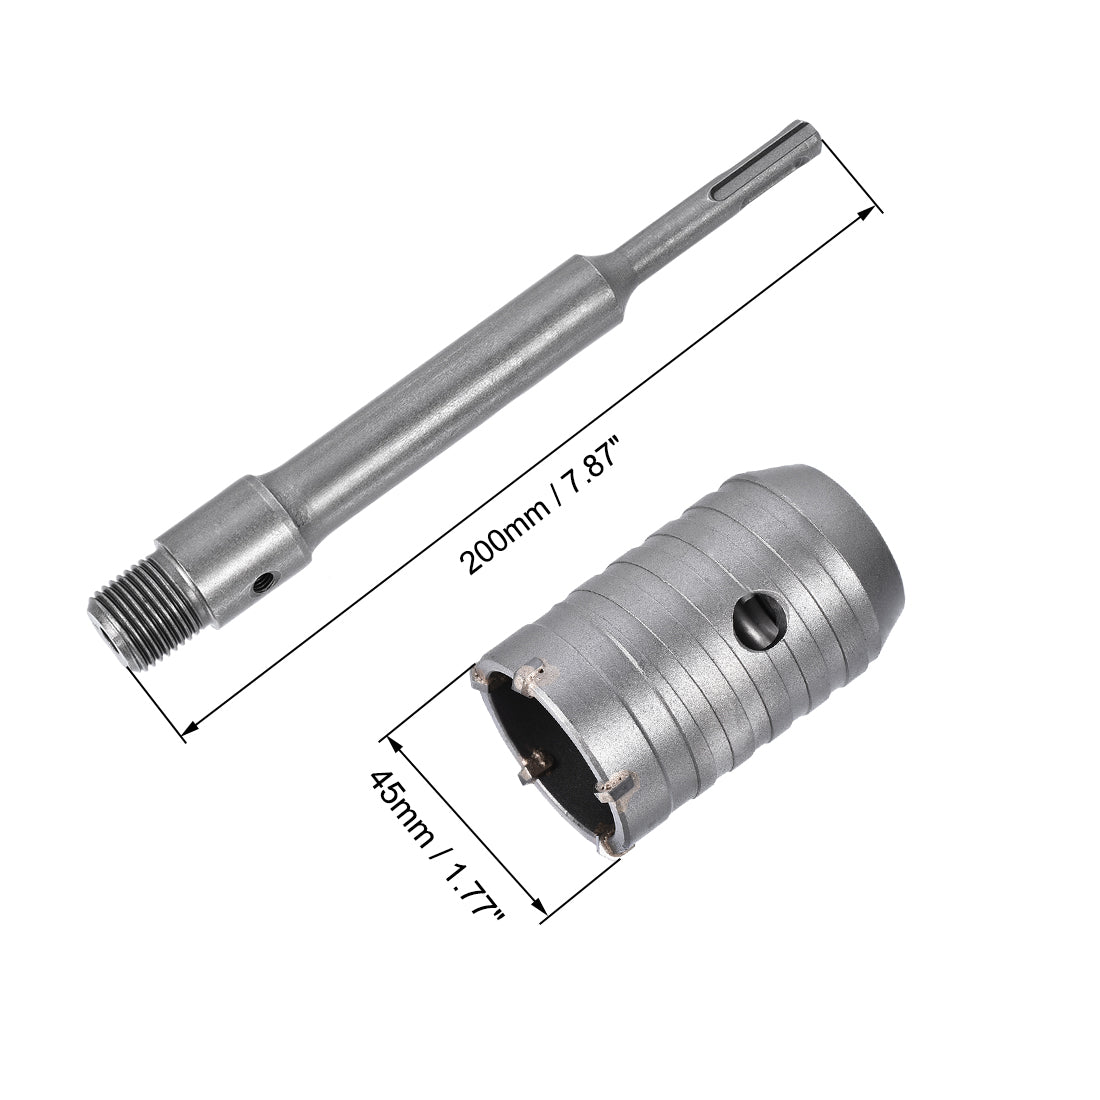 uxcell Uxcell Wall Hole Drill Bit Hole Saw Round Shank with Connecting Rod Drill for SDS X4 Impact Drill